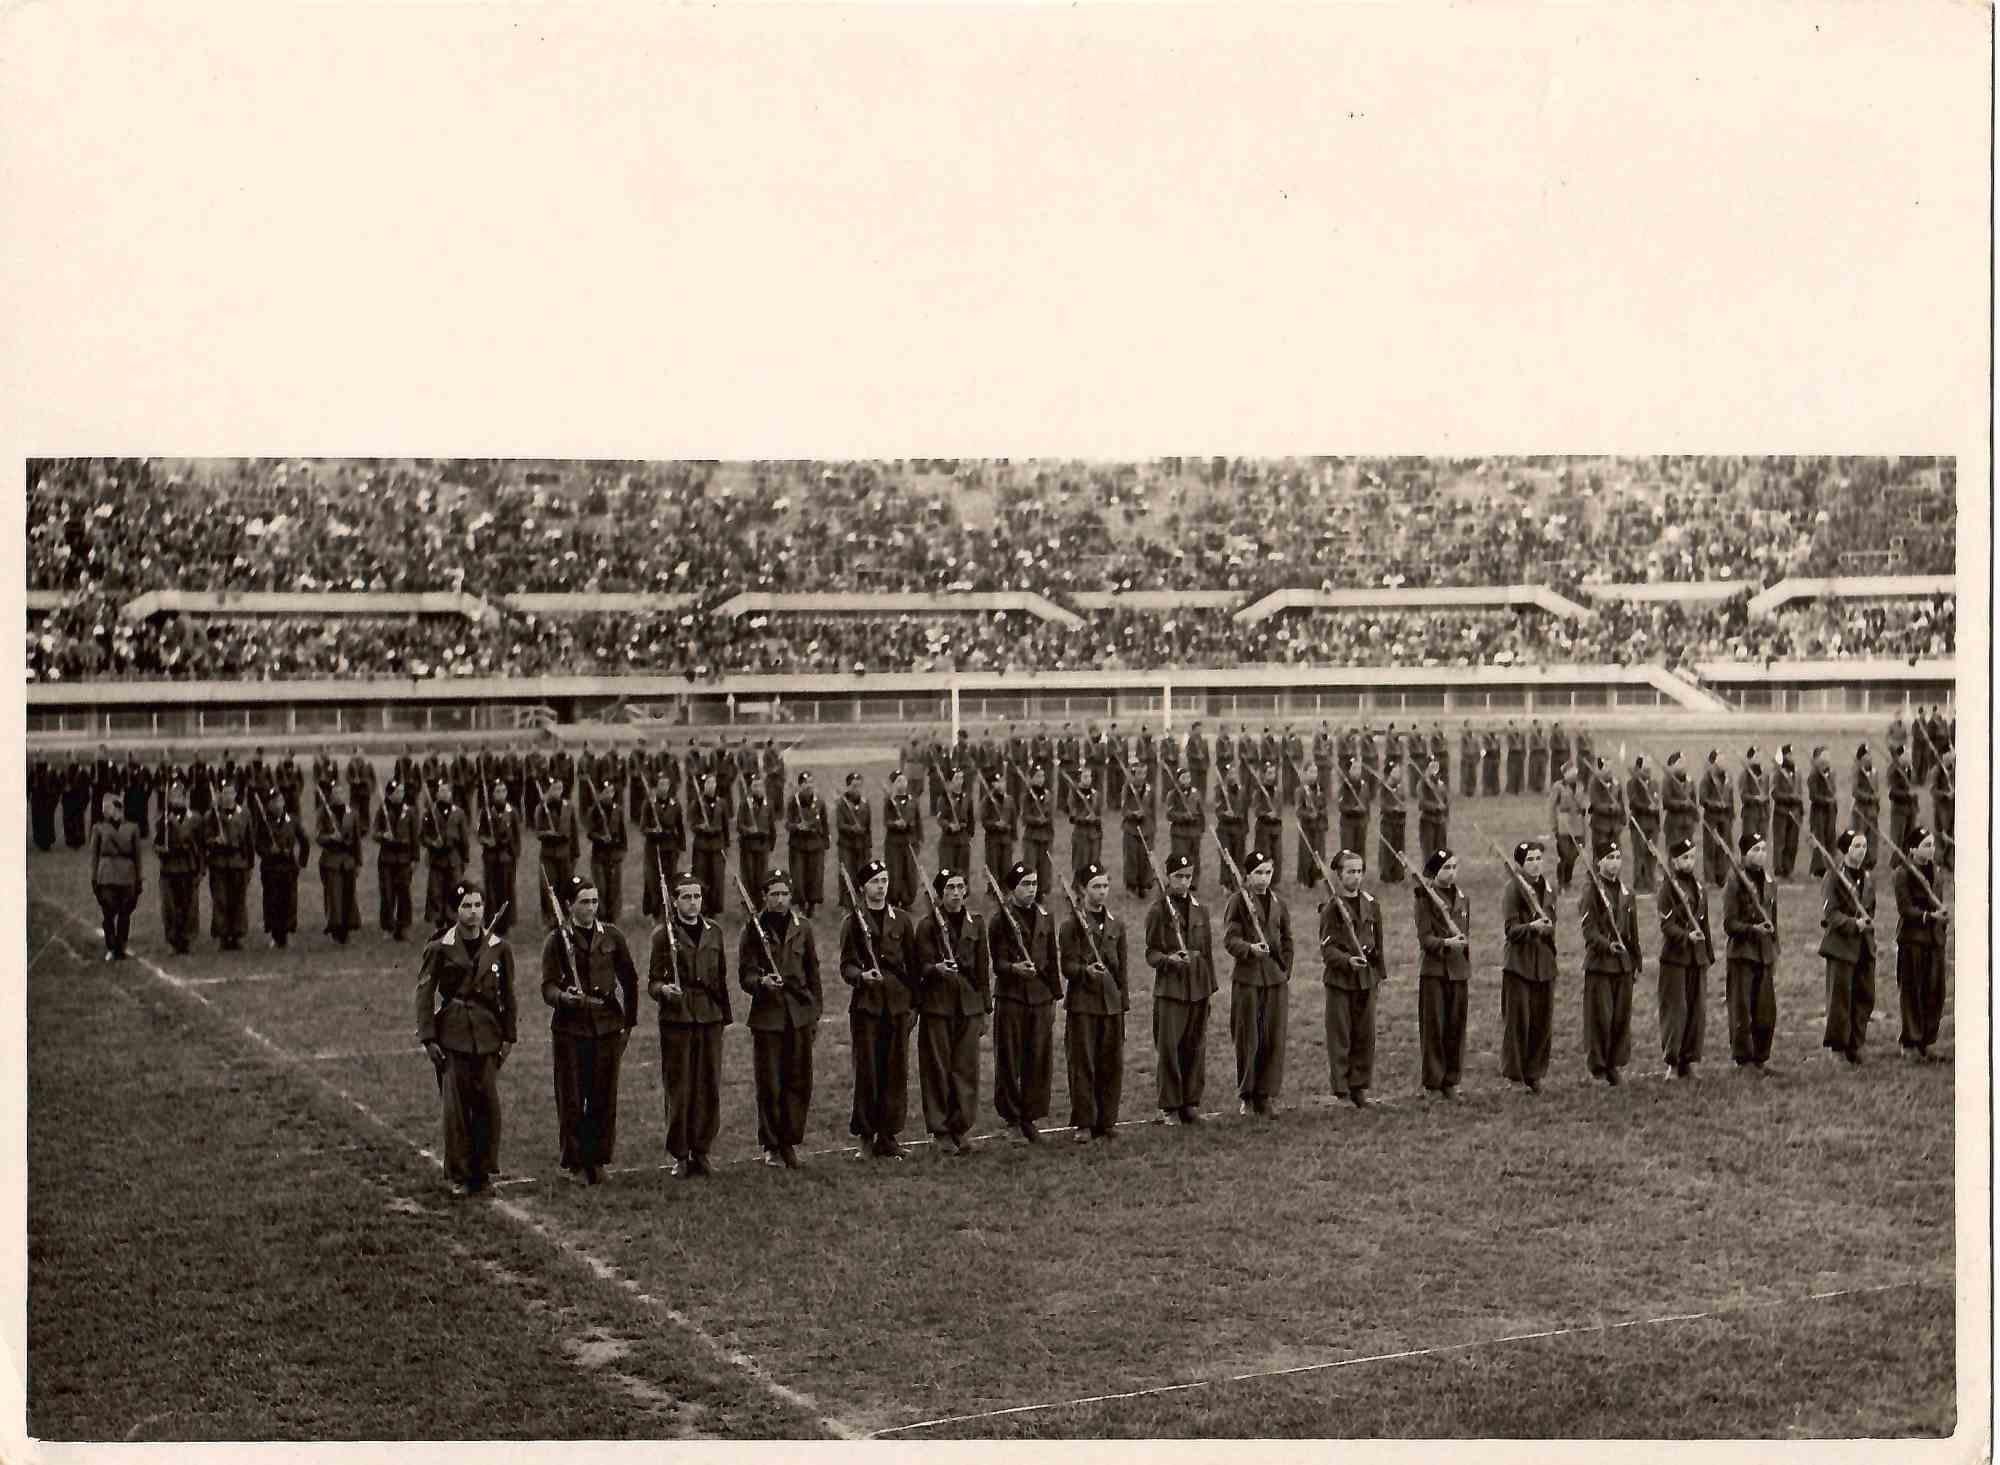 Unknown Black and White Photograph - Military Show in the Stadium - Vintage B/W Photo - 1930